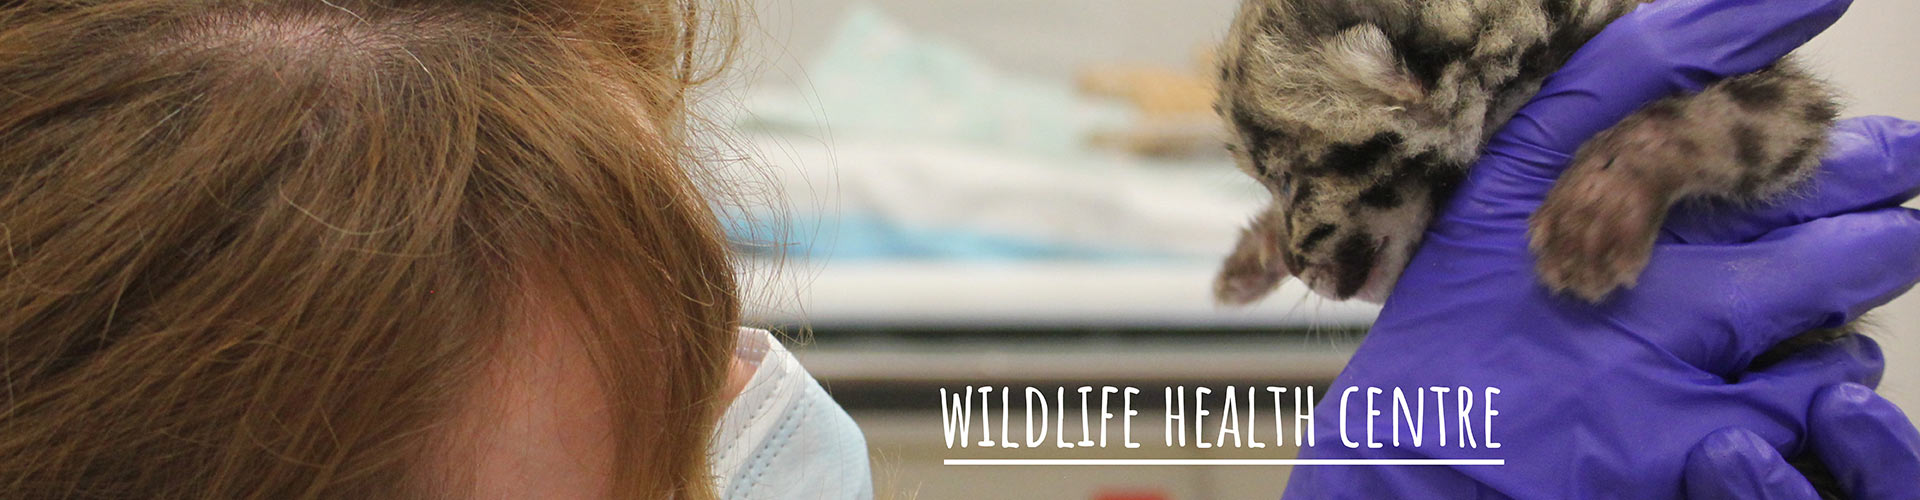 Wild Life Health Centre Science & Research Partners